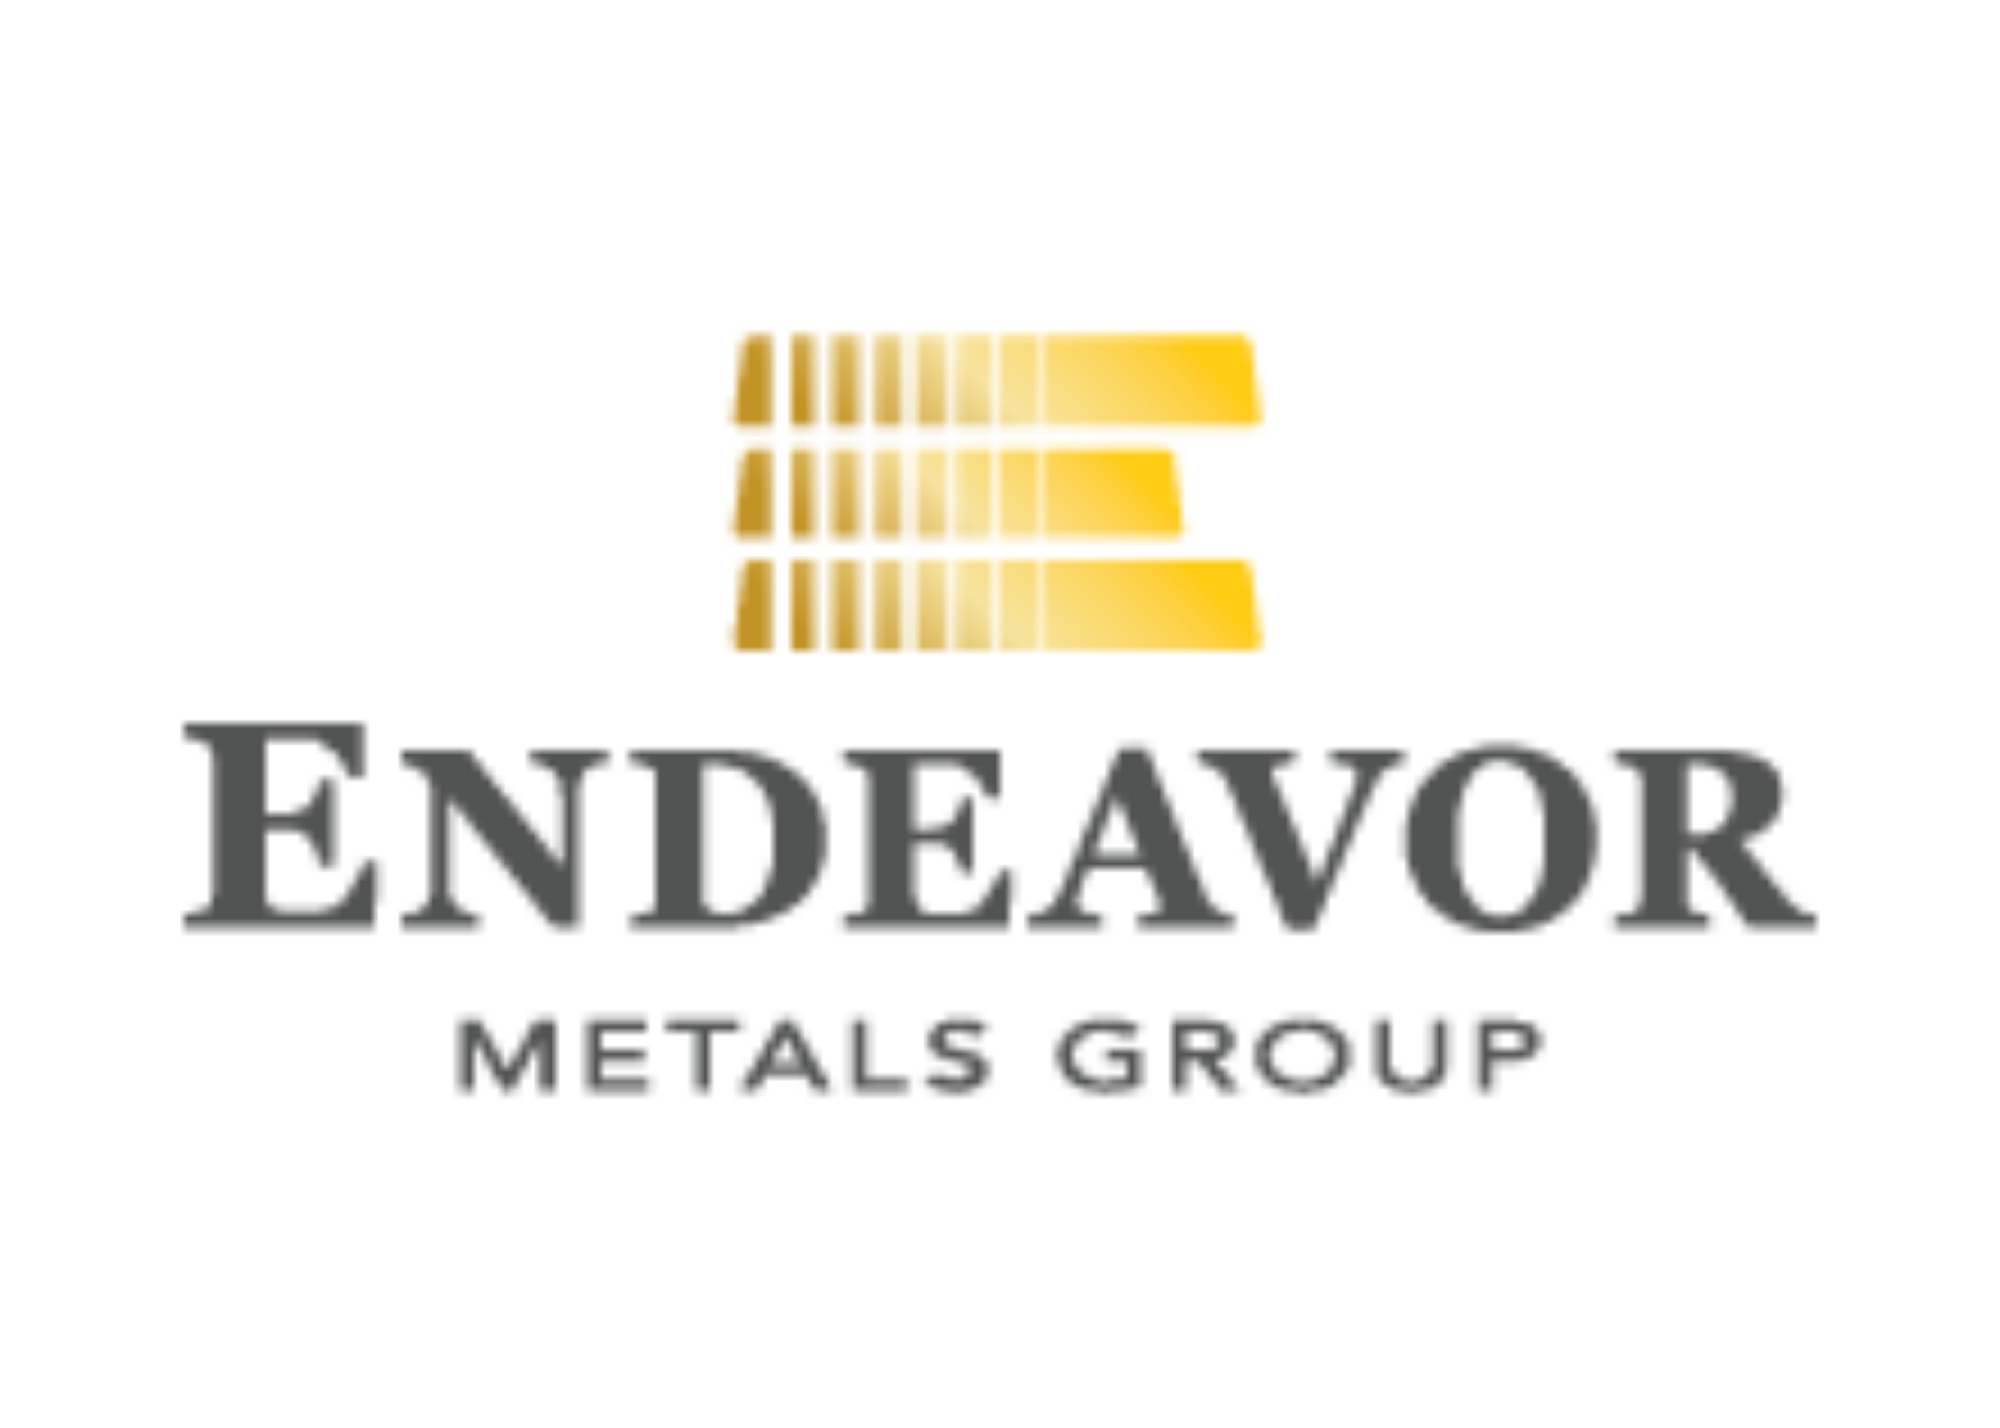 Endeavor Metals Group, Tuesday, December 13, 2022, Press release picture